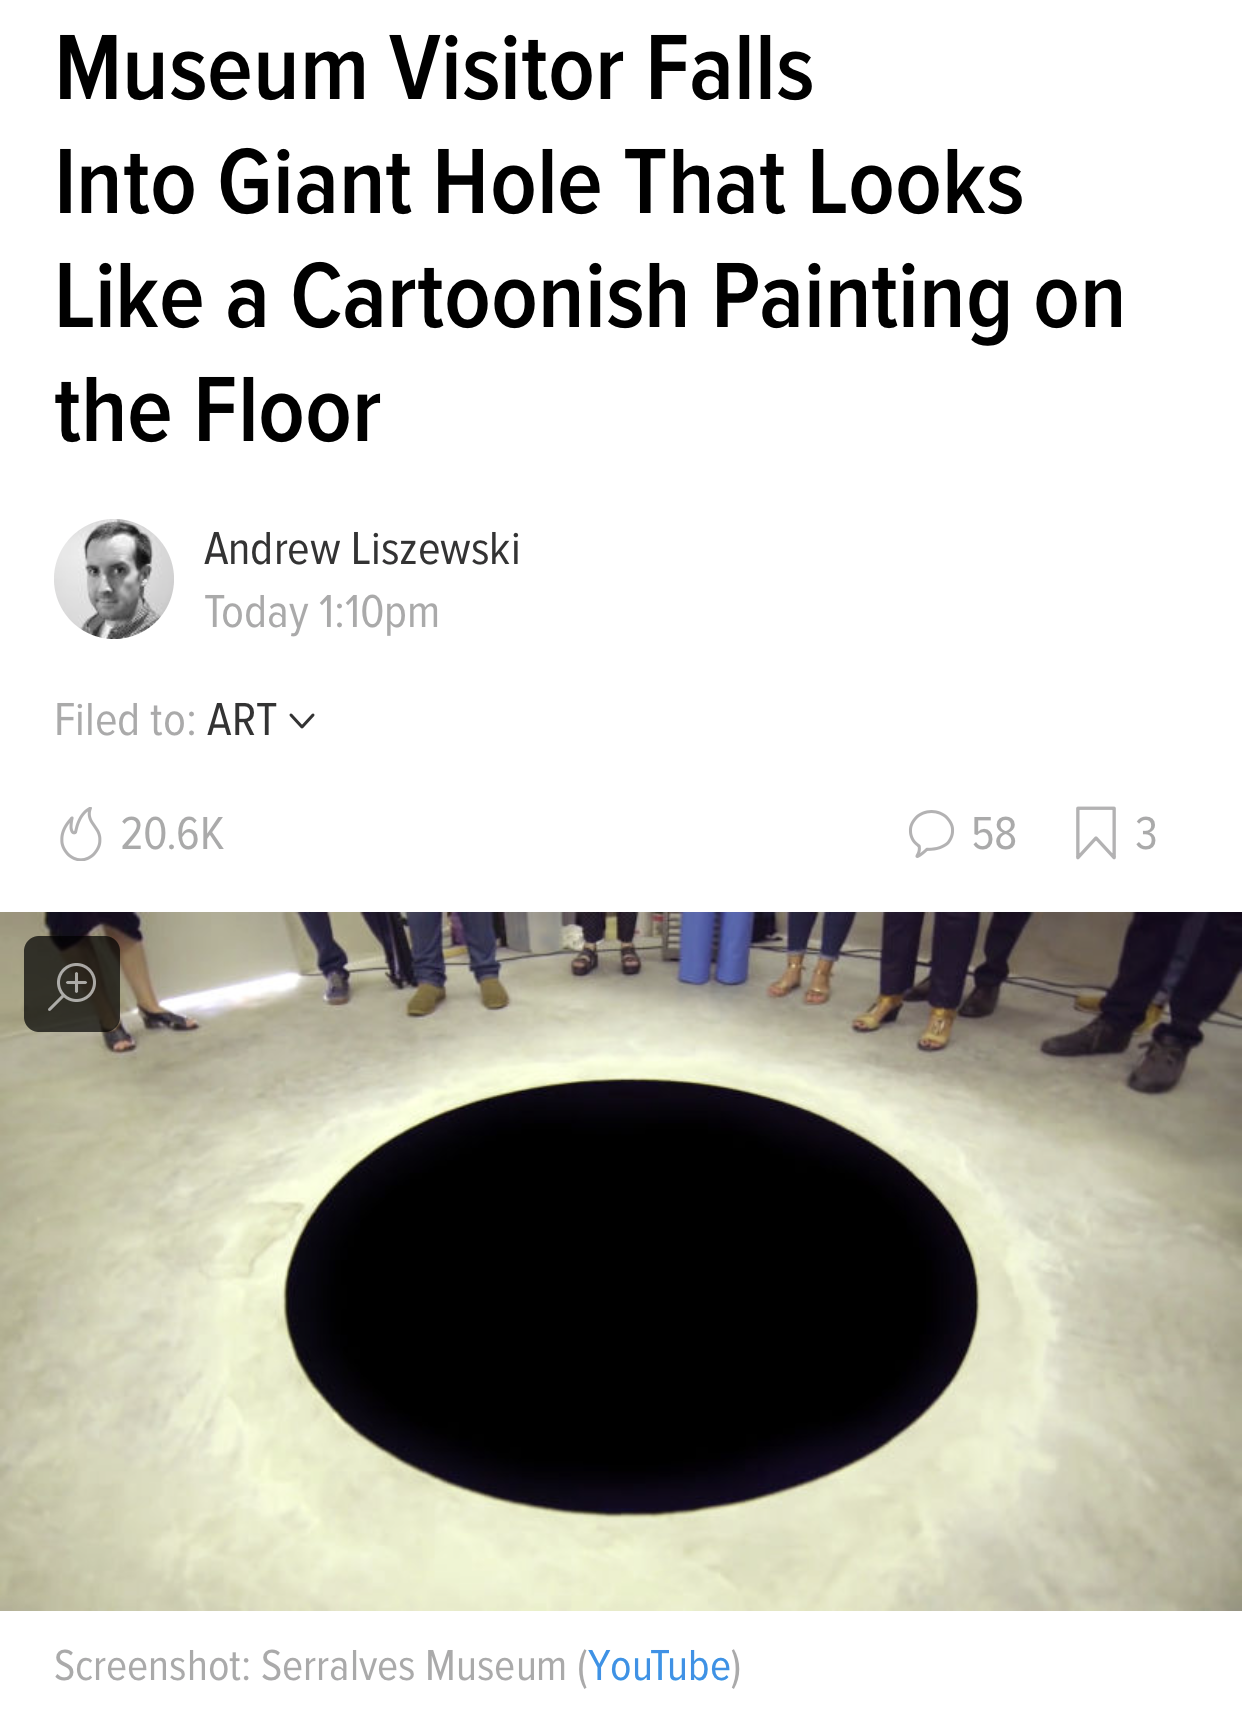 memes - find us on facebook - Museum Visitor Falls Into Giant Hole That Looks a Cartoonish Painting on the Floor Andrew Liszewski Today Filed to Art 58 03 Screenshot Serralves Museum YouTube